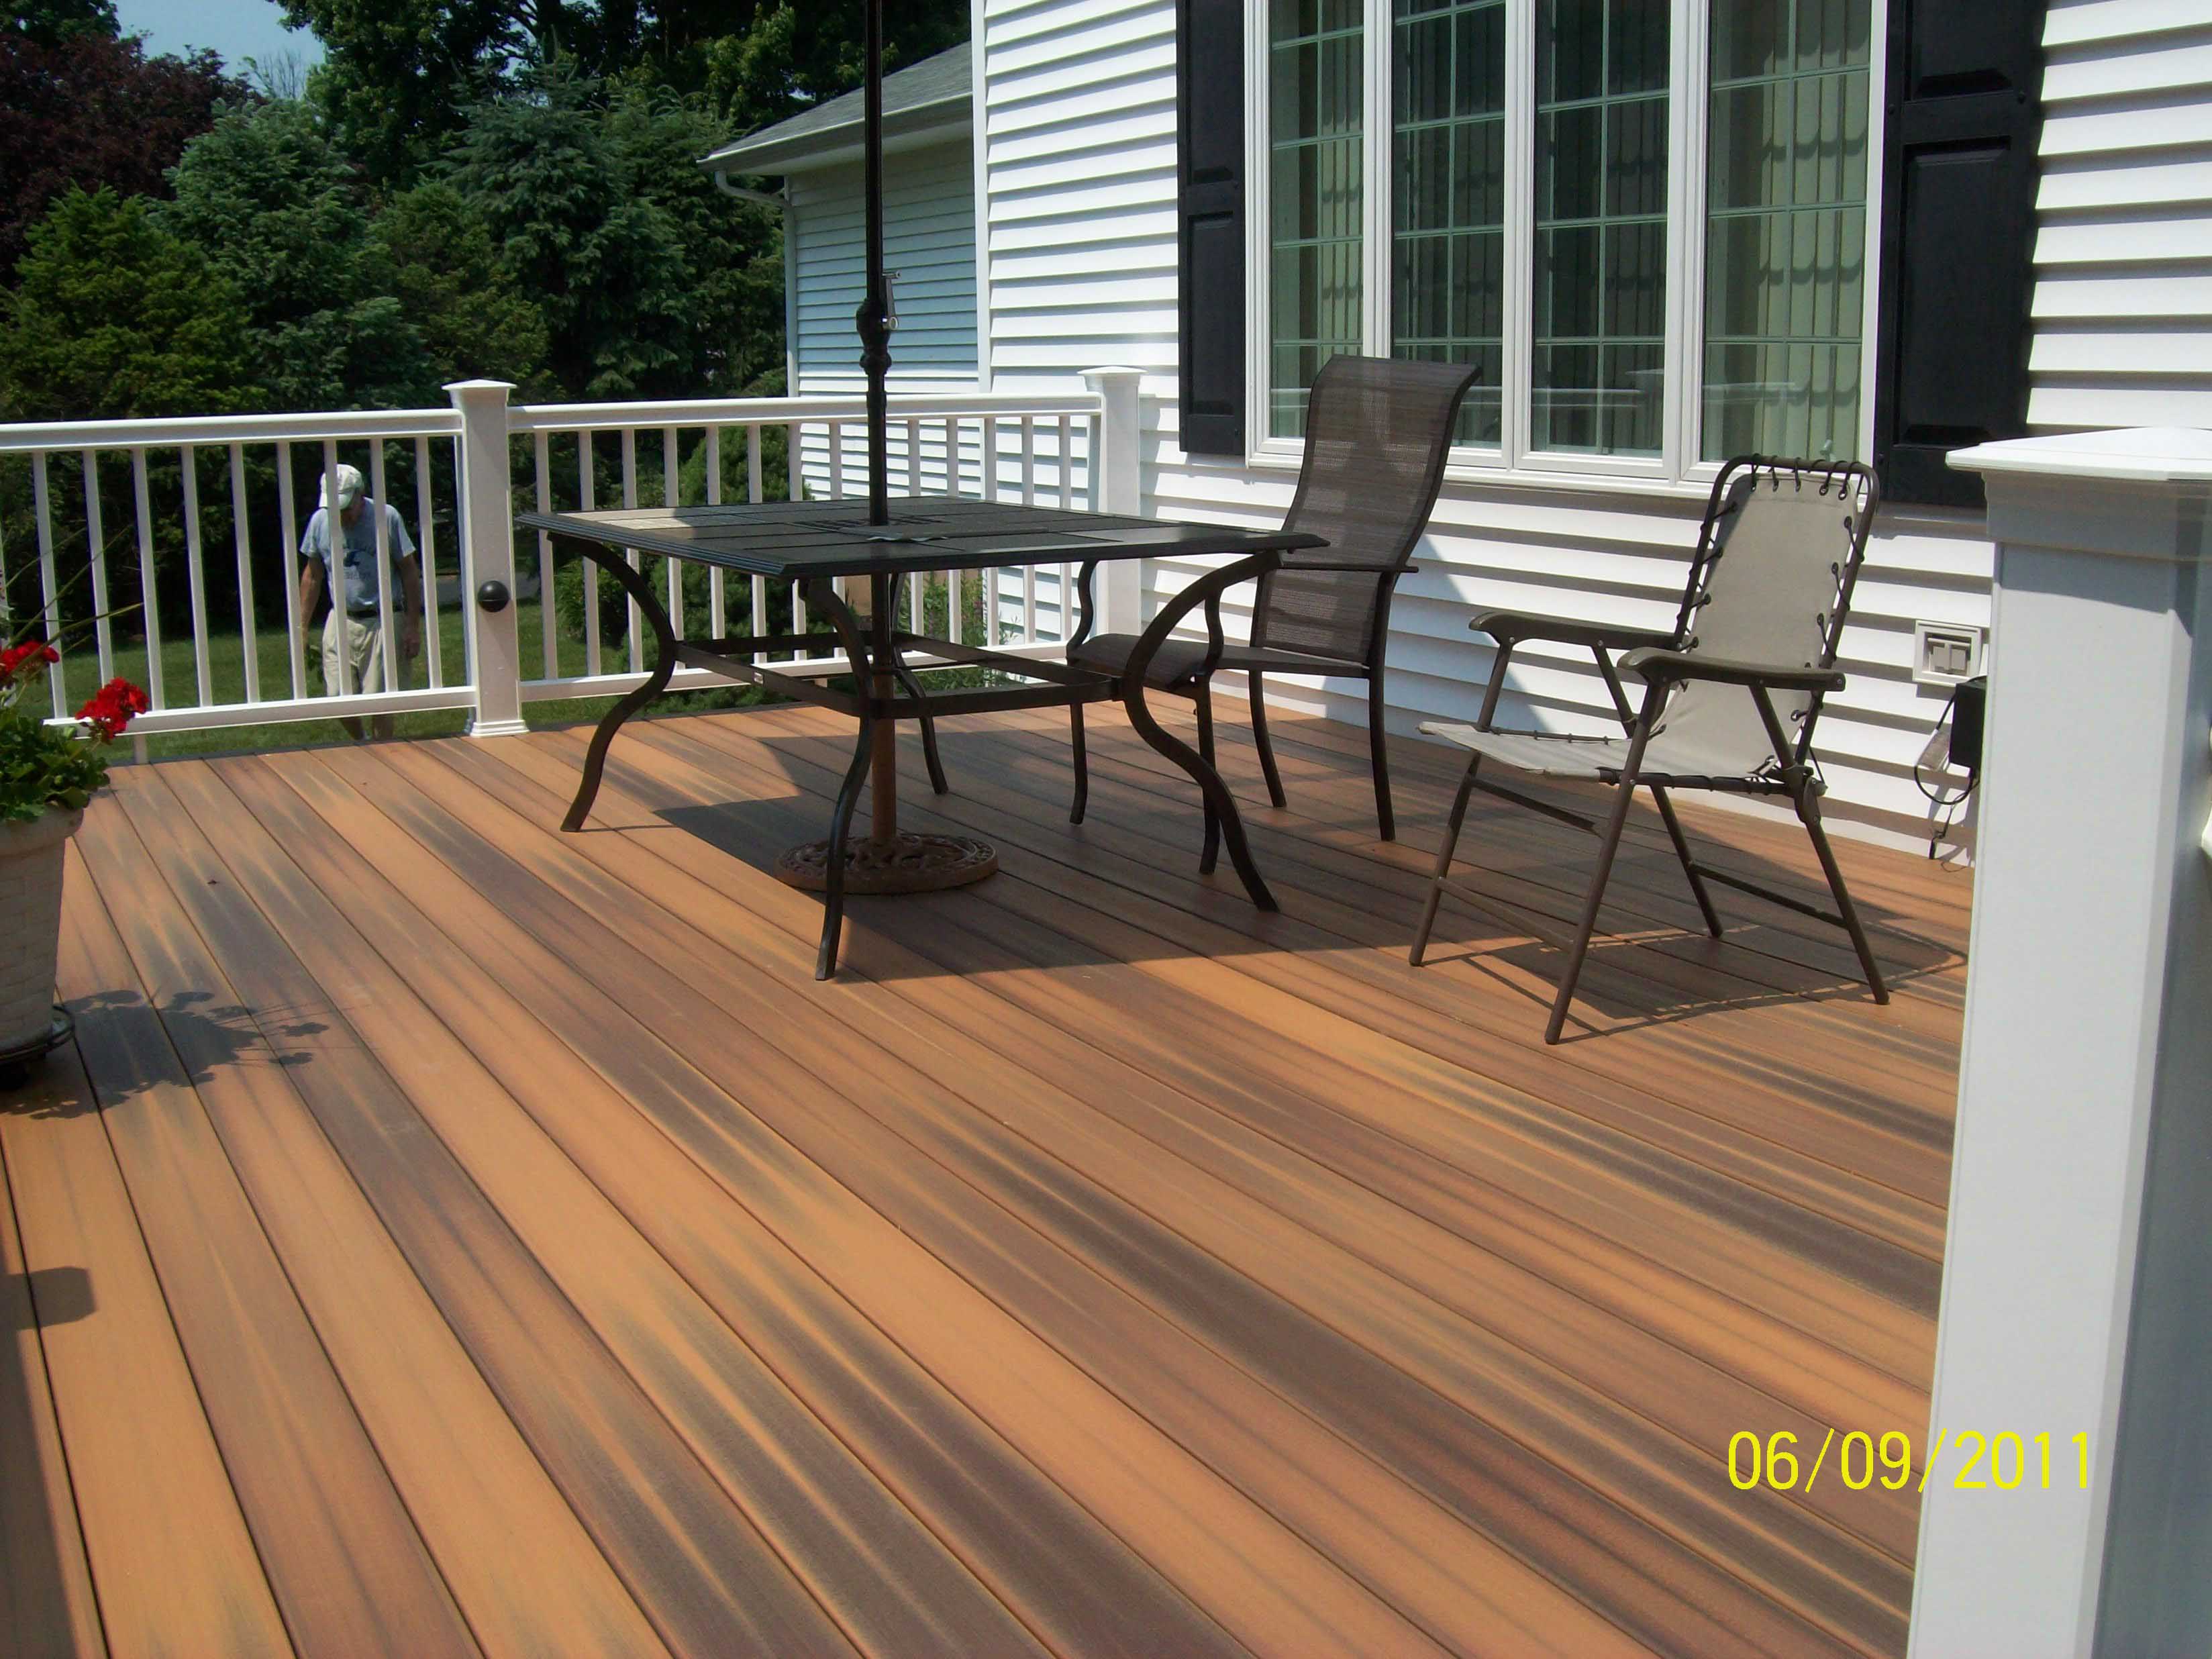 Decks are meant to be enjoyed, not maintained.